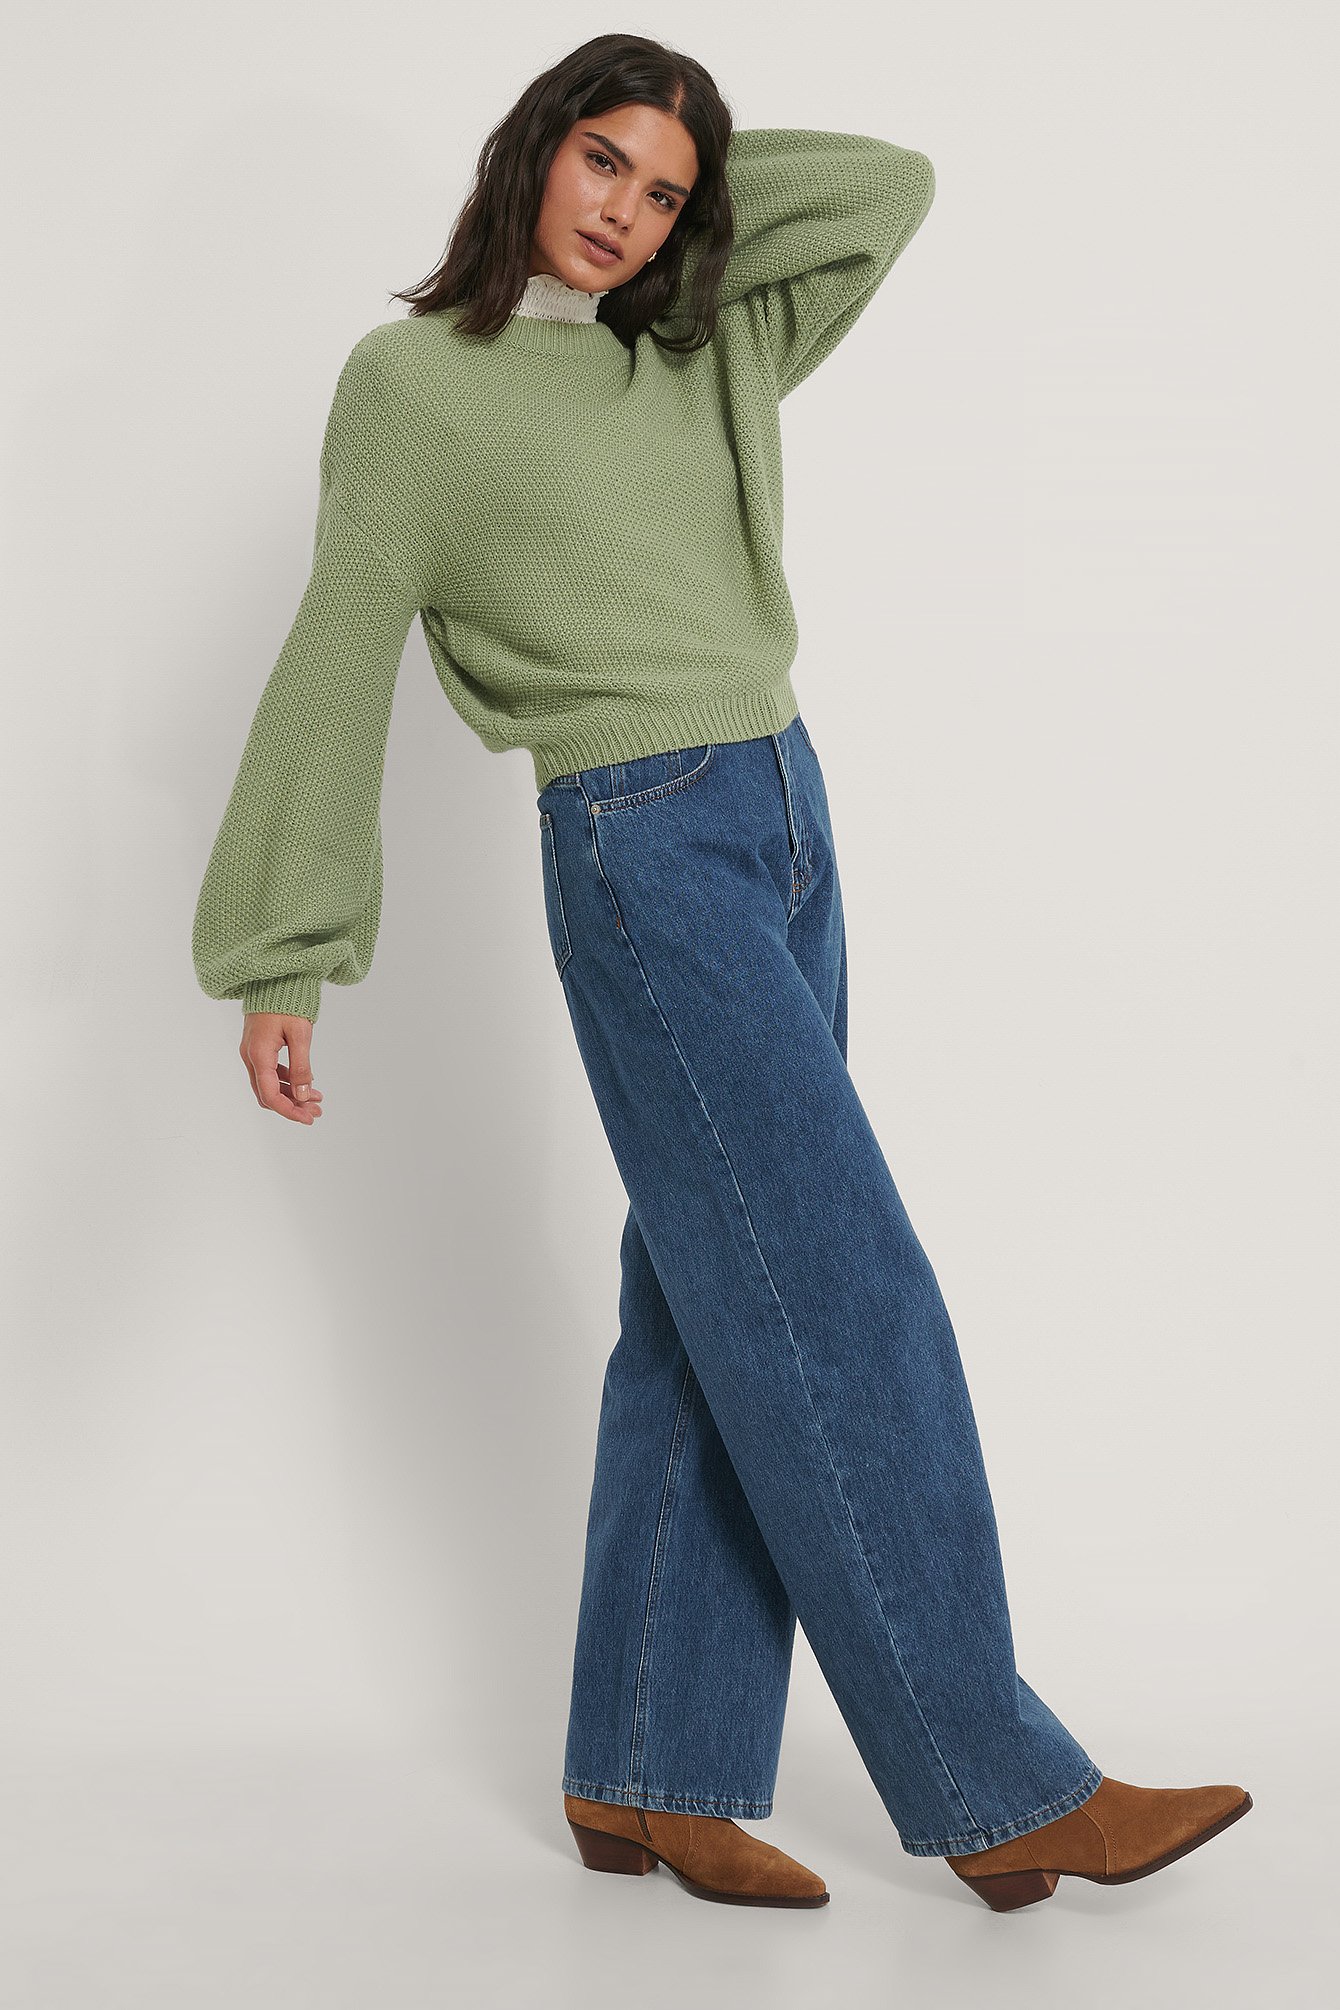 Balloon Sleeve Knitted Cropped Sweater with Jeans.